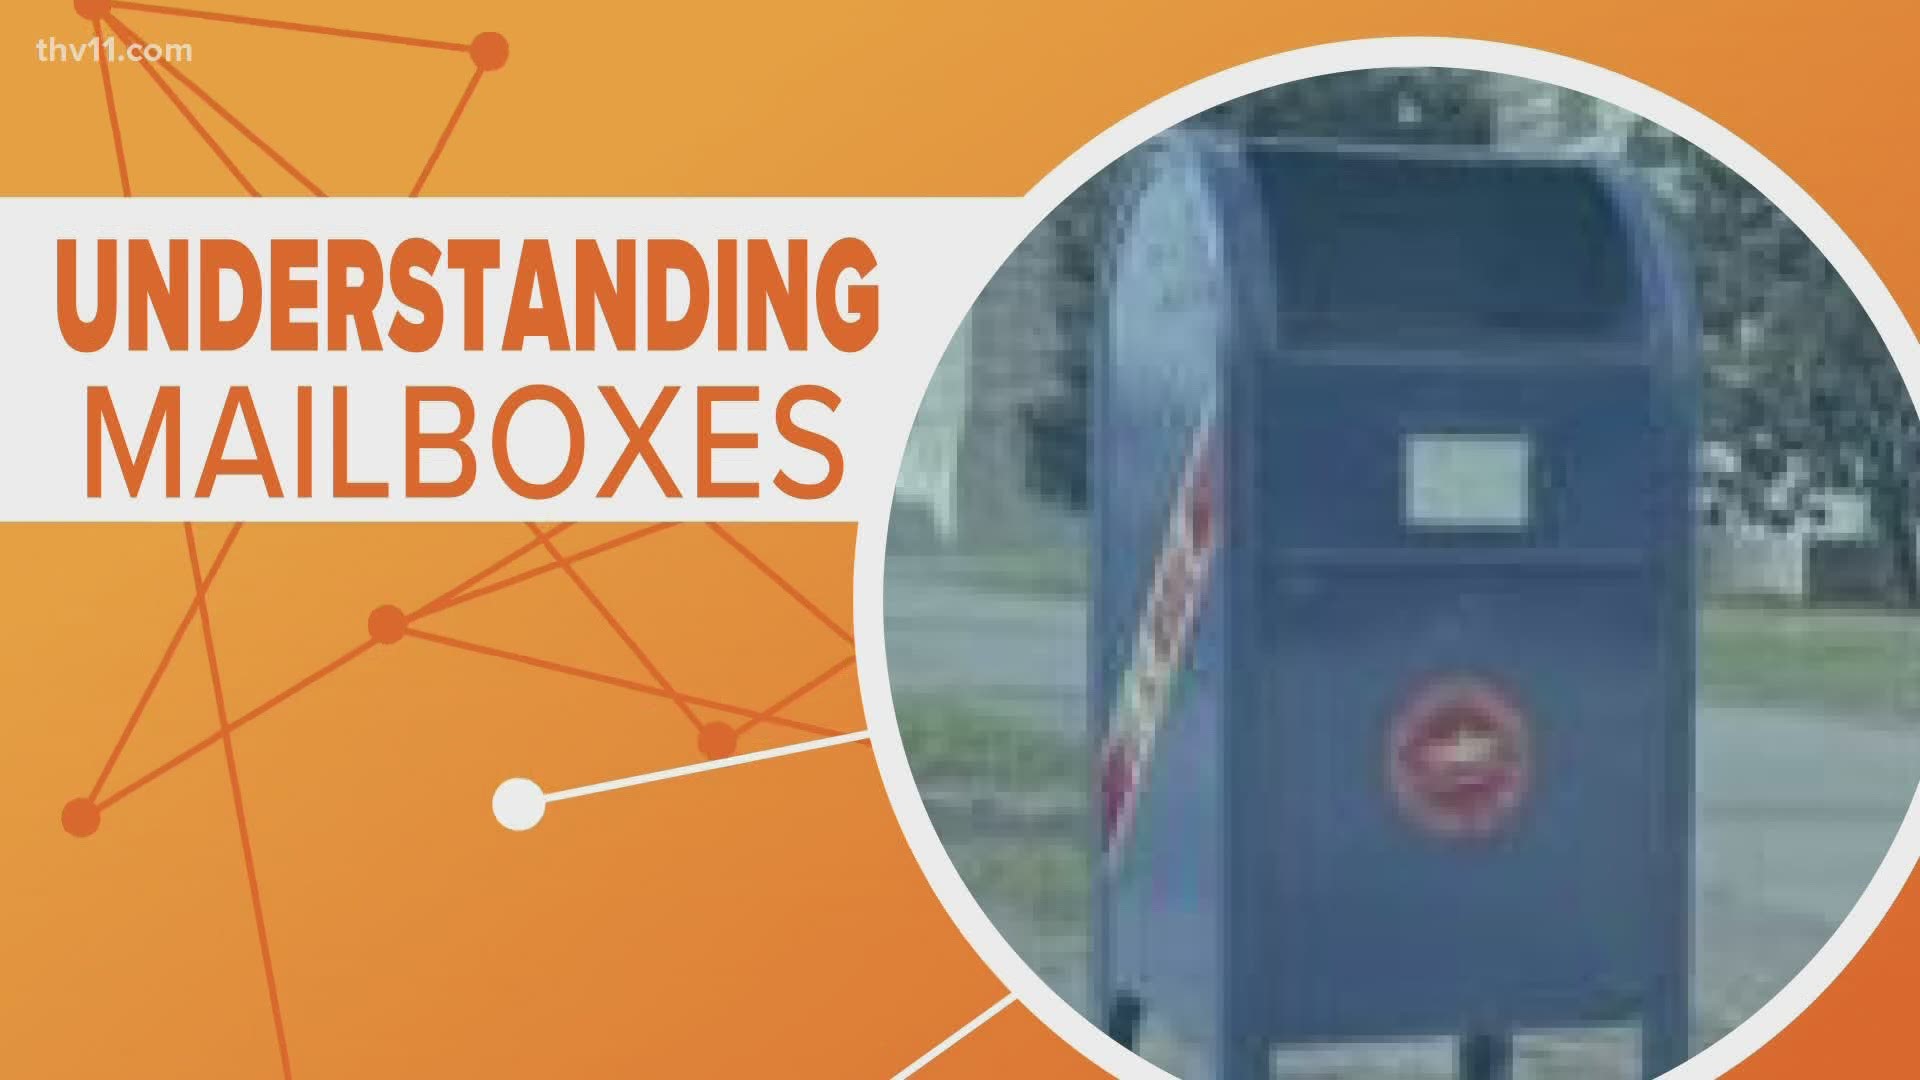 USPS collection boxes have been around a lot longer than many people realize and play a significant role in our nation's history.